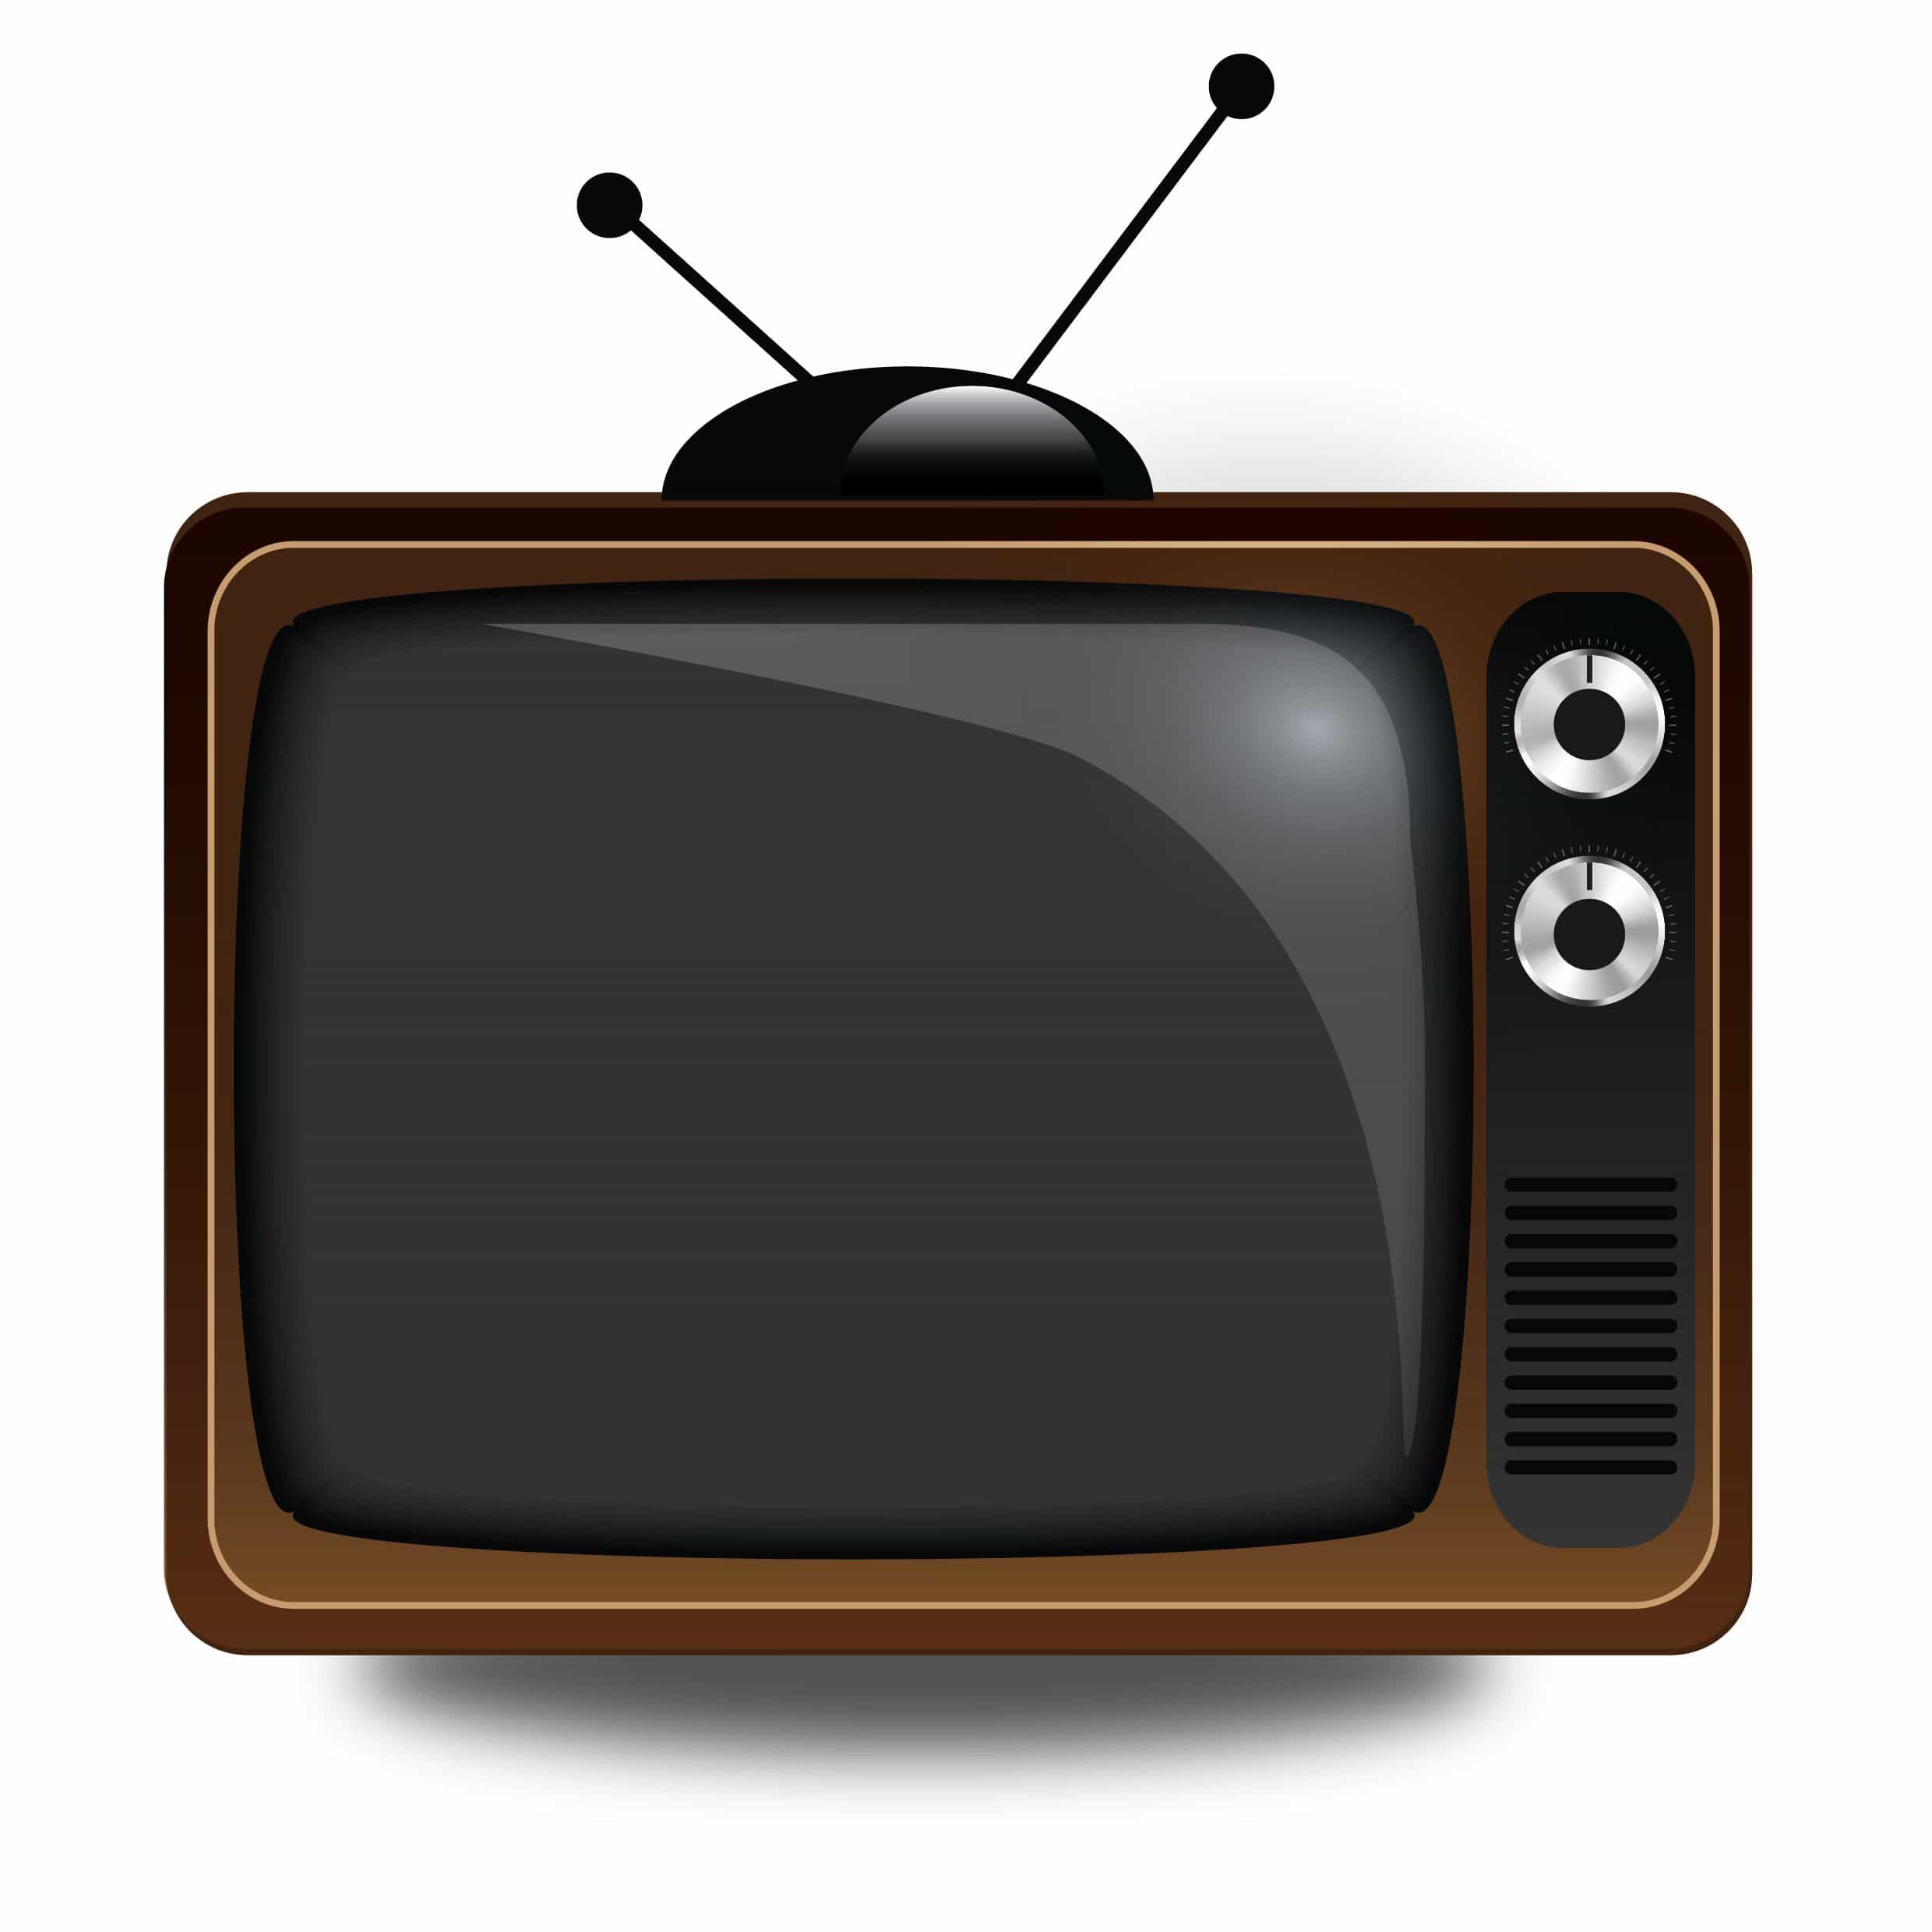 Are you Wasting Your Time in it – Let’s Talk About Television